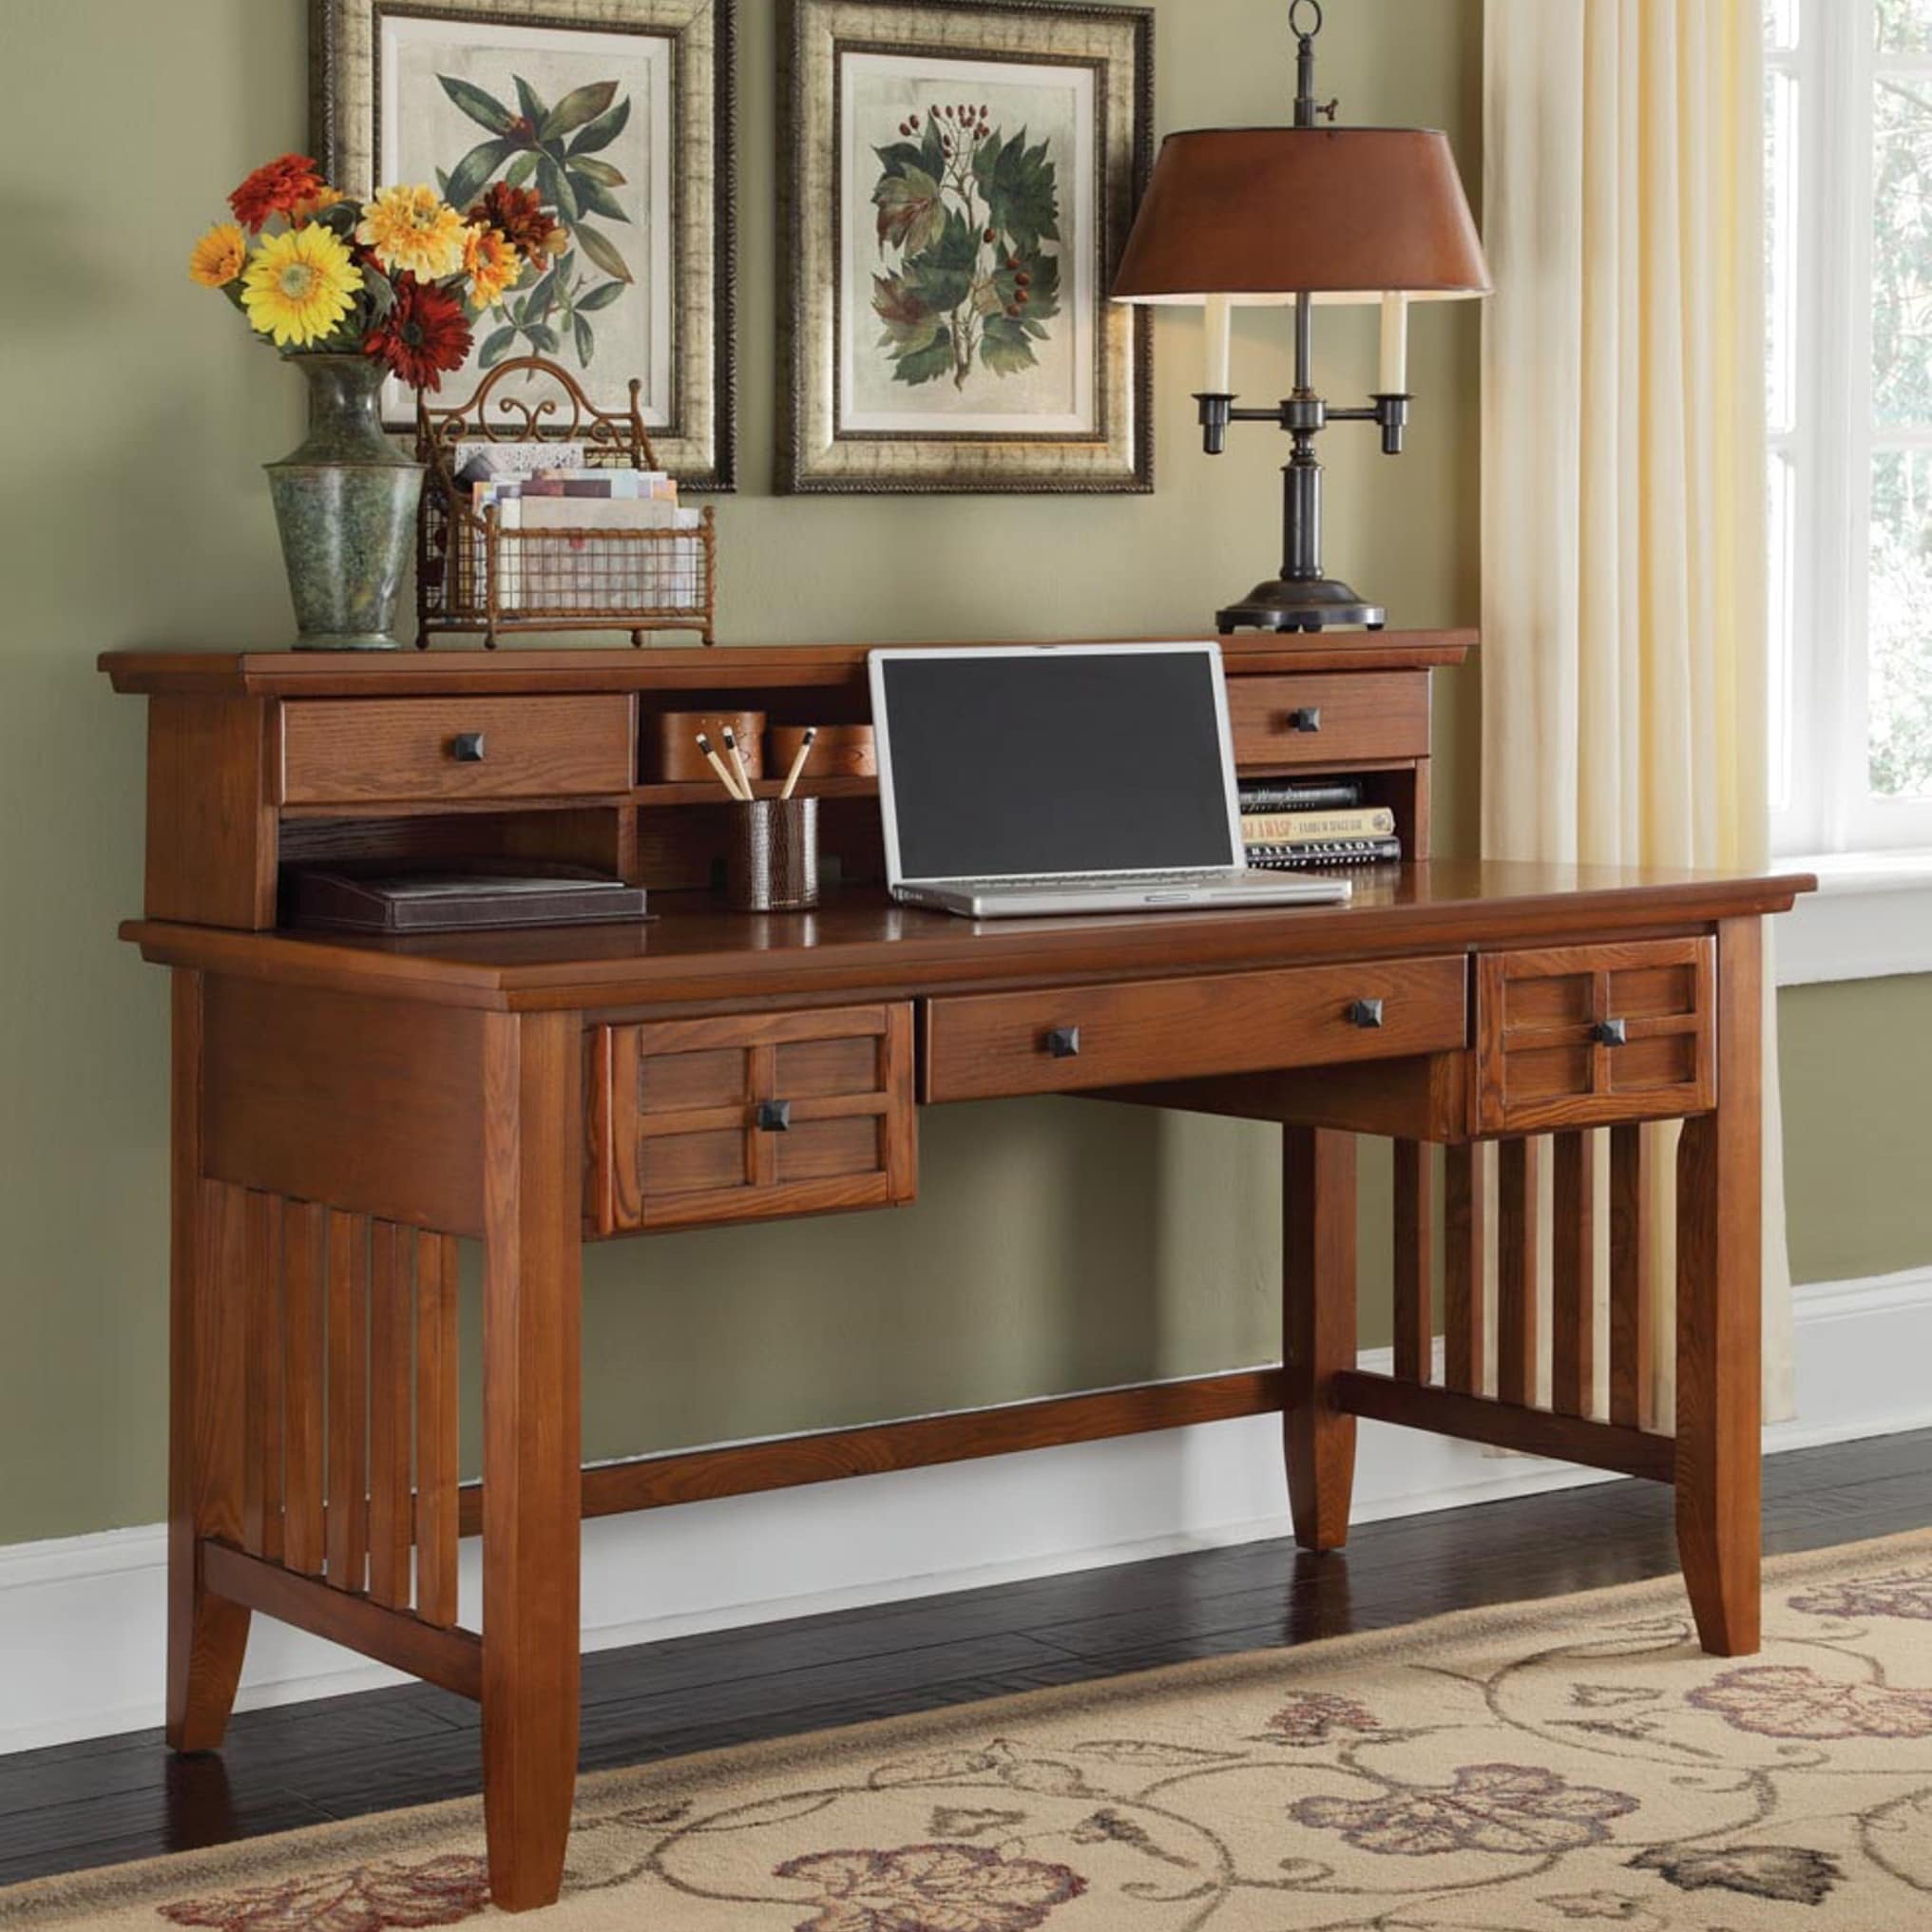 Shop Arts And Crafts Cottage Oak Executive Desk And Hutch Free